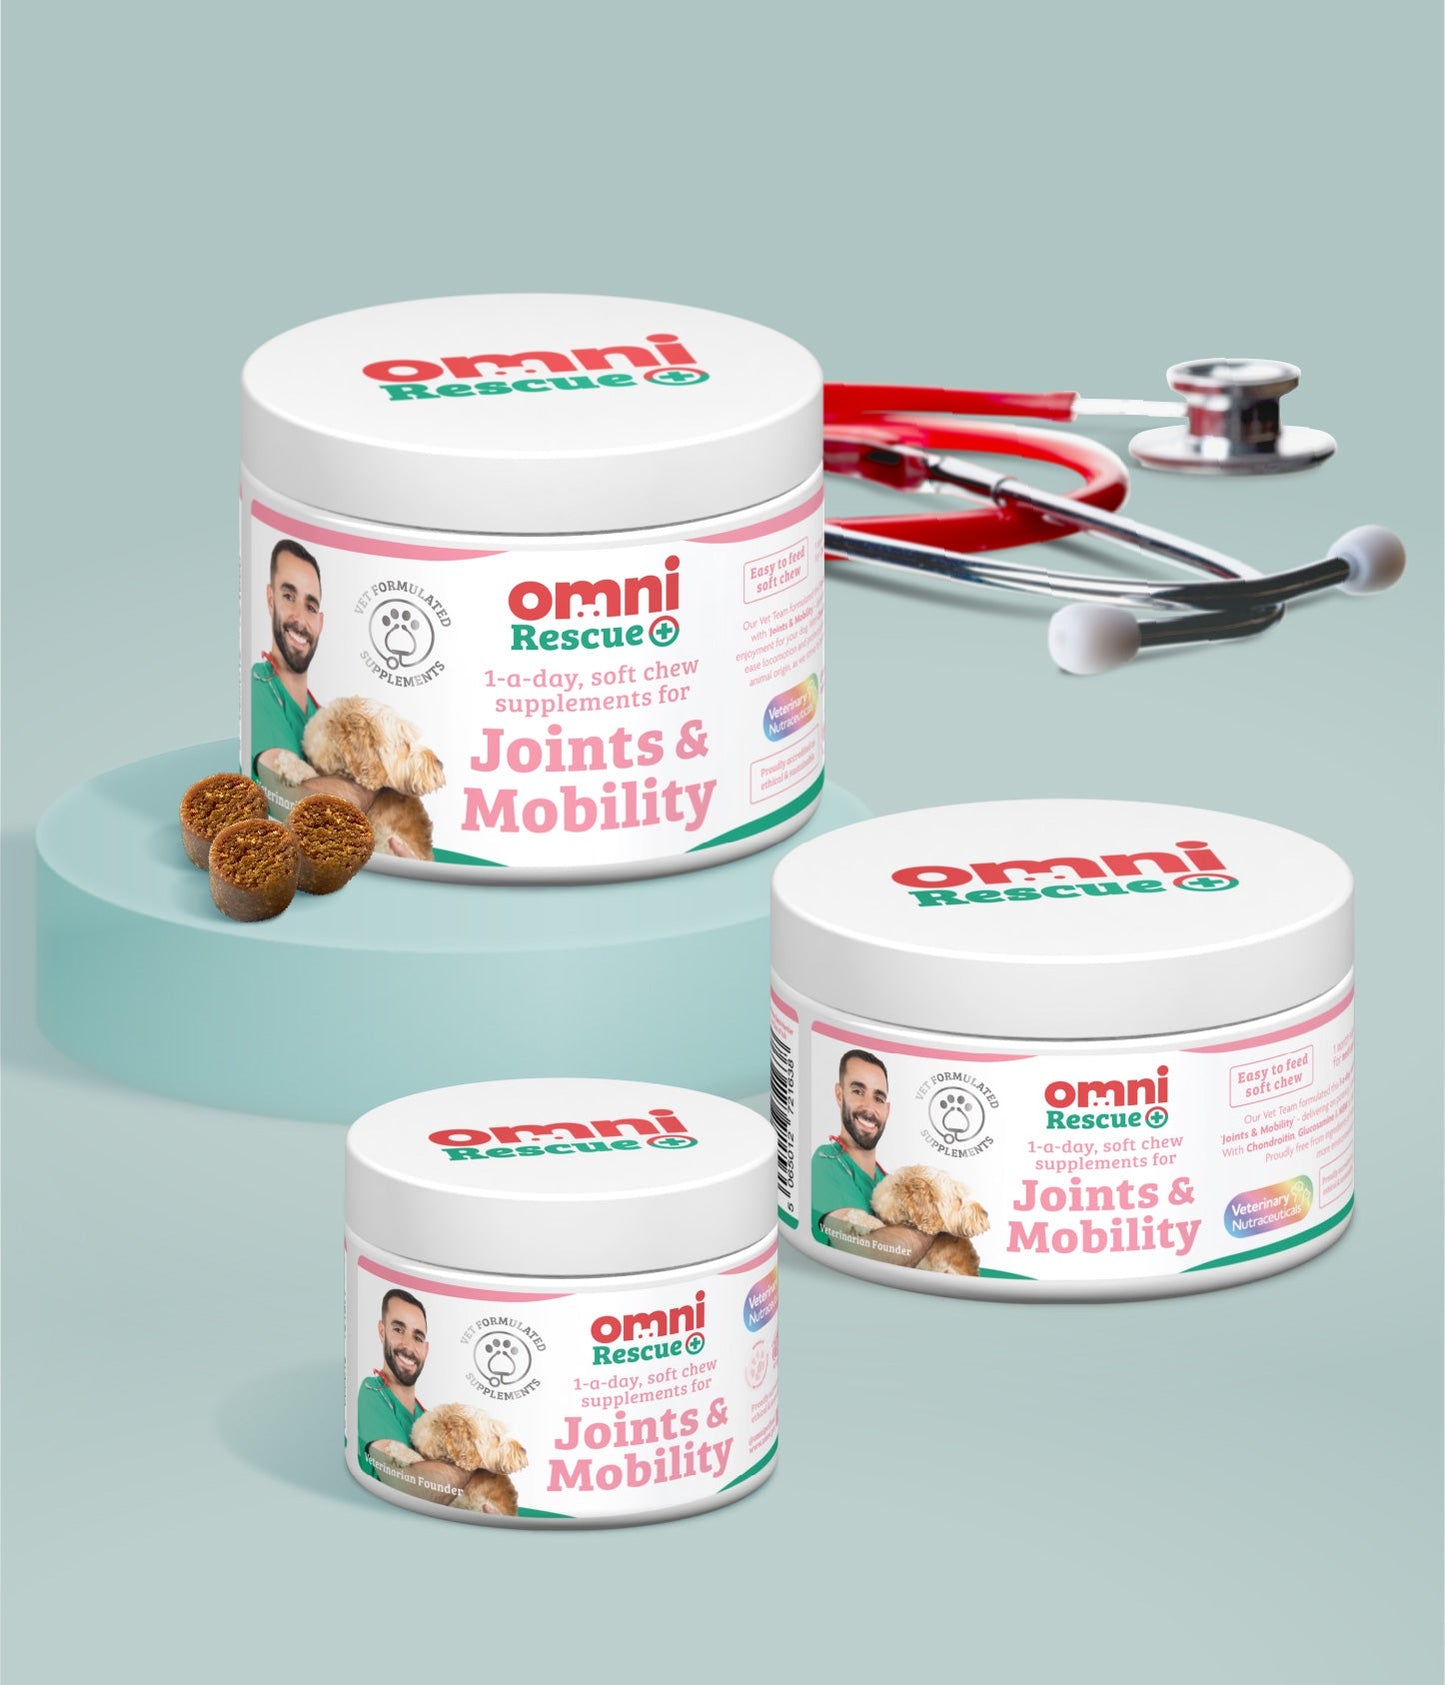 Omni Rescue - ‘Joints & Mobility’ supplement